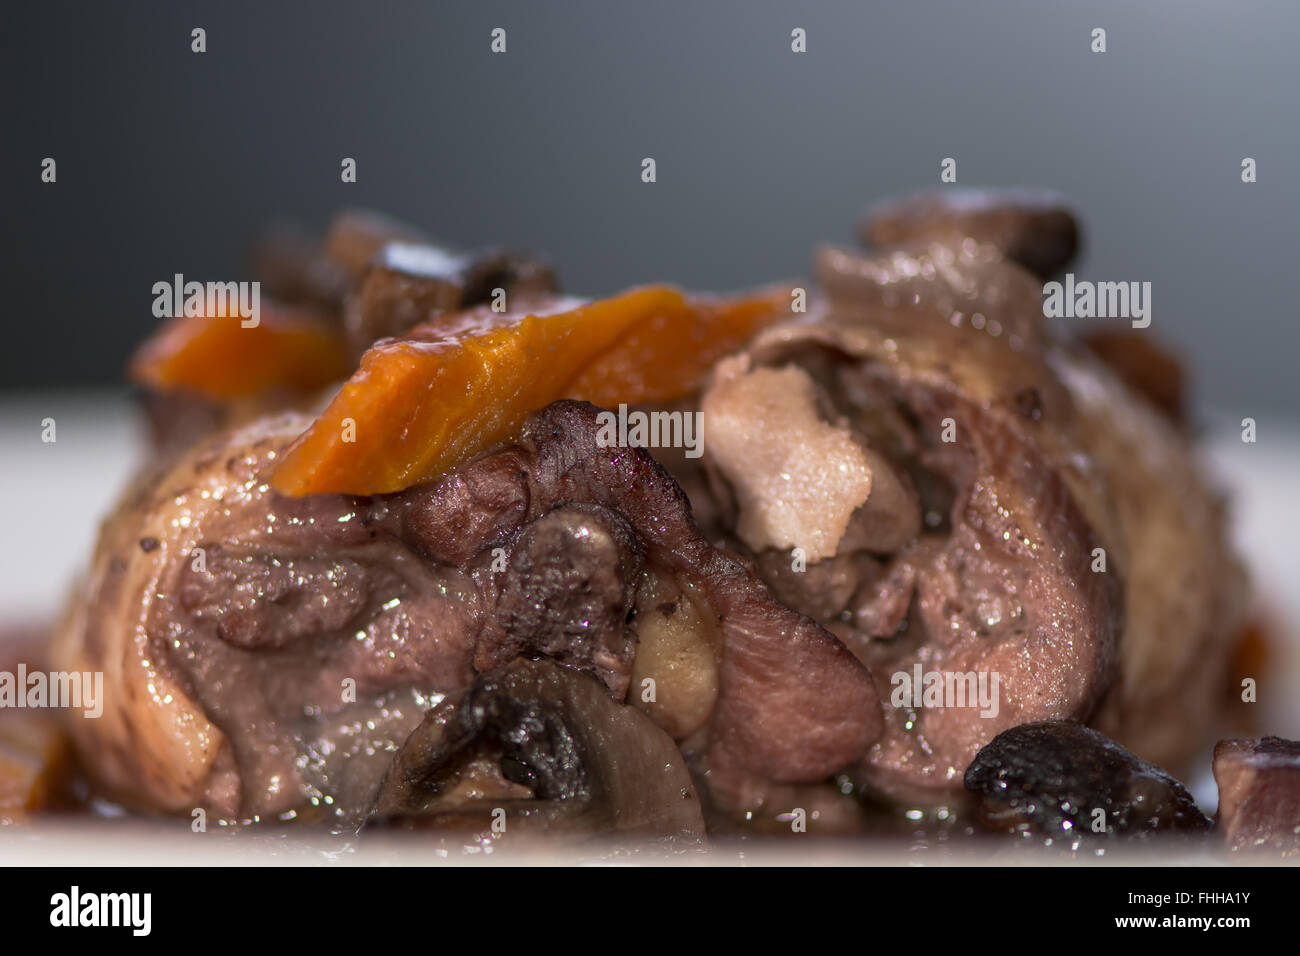 Coq au vin detail from side. Classic French chicken dish prepared served with vegetables in red wine Stock Photo